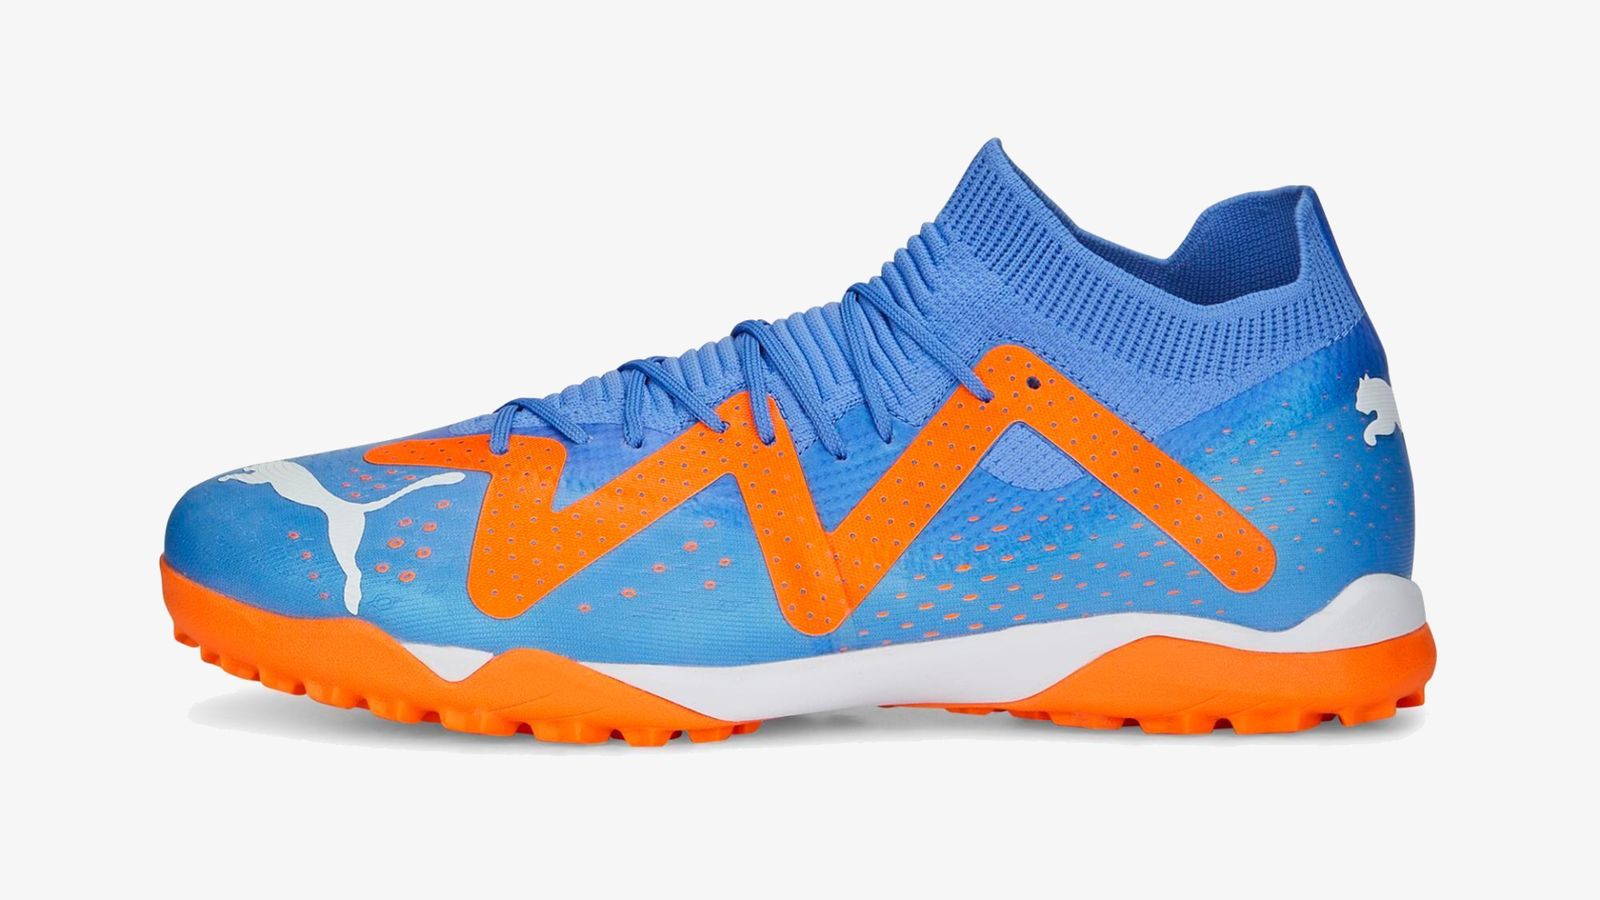 PUMA FUTURE Match TT product image of a bright blue astro turf boot featuring orange and white details.